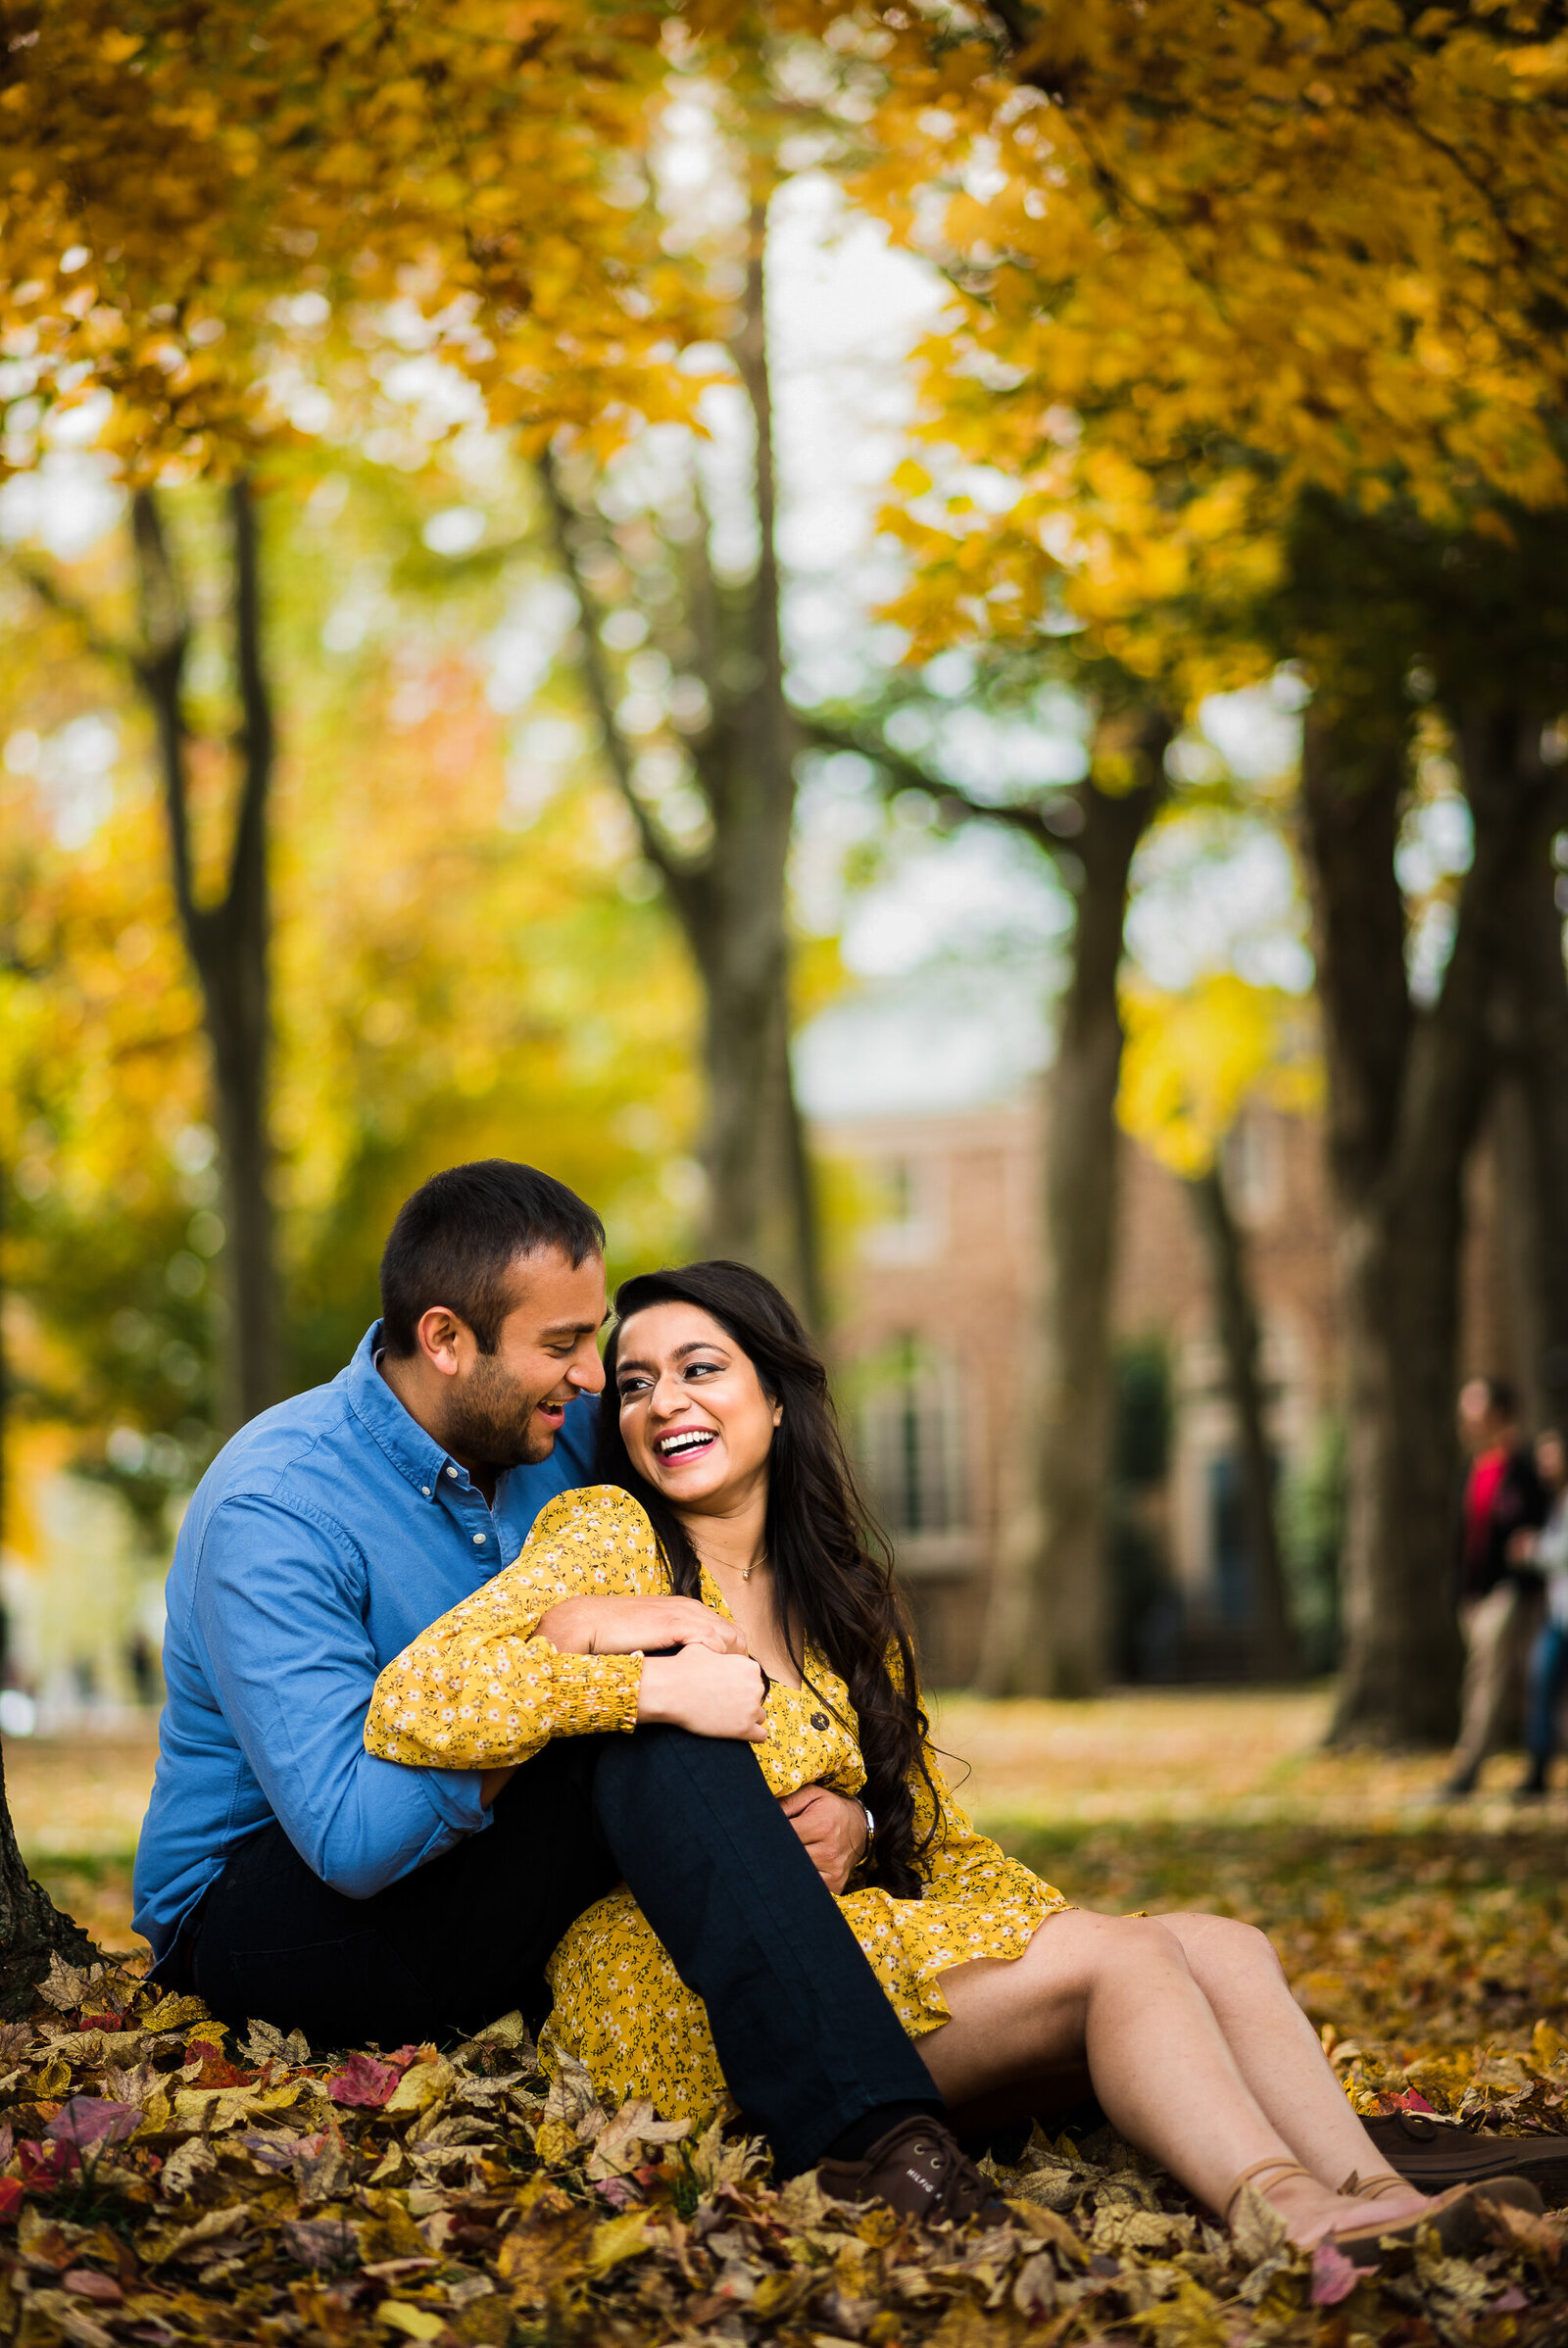 Ishan Fotografi is a reputable photographer offering engagement photography services in New Jersey.